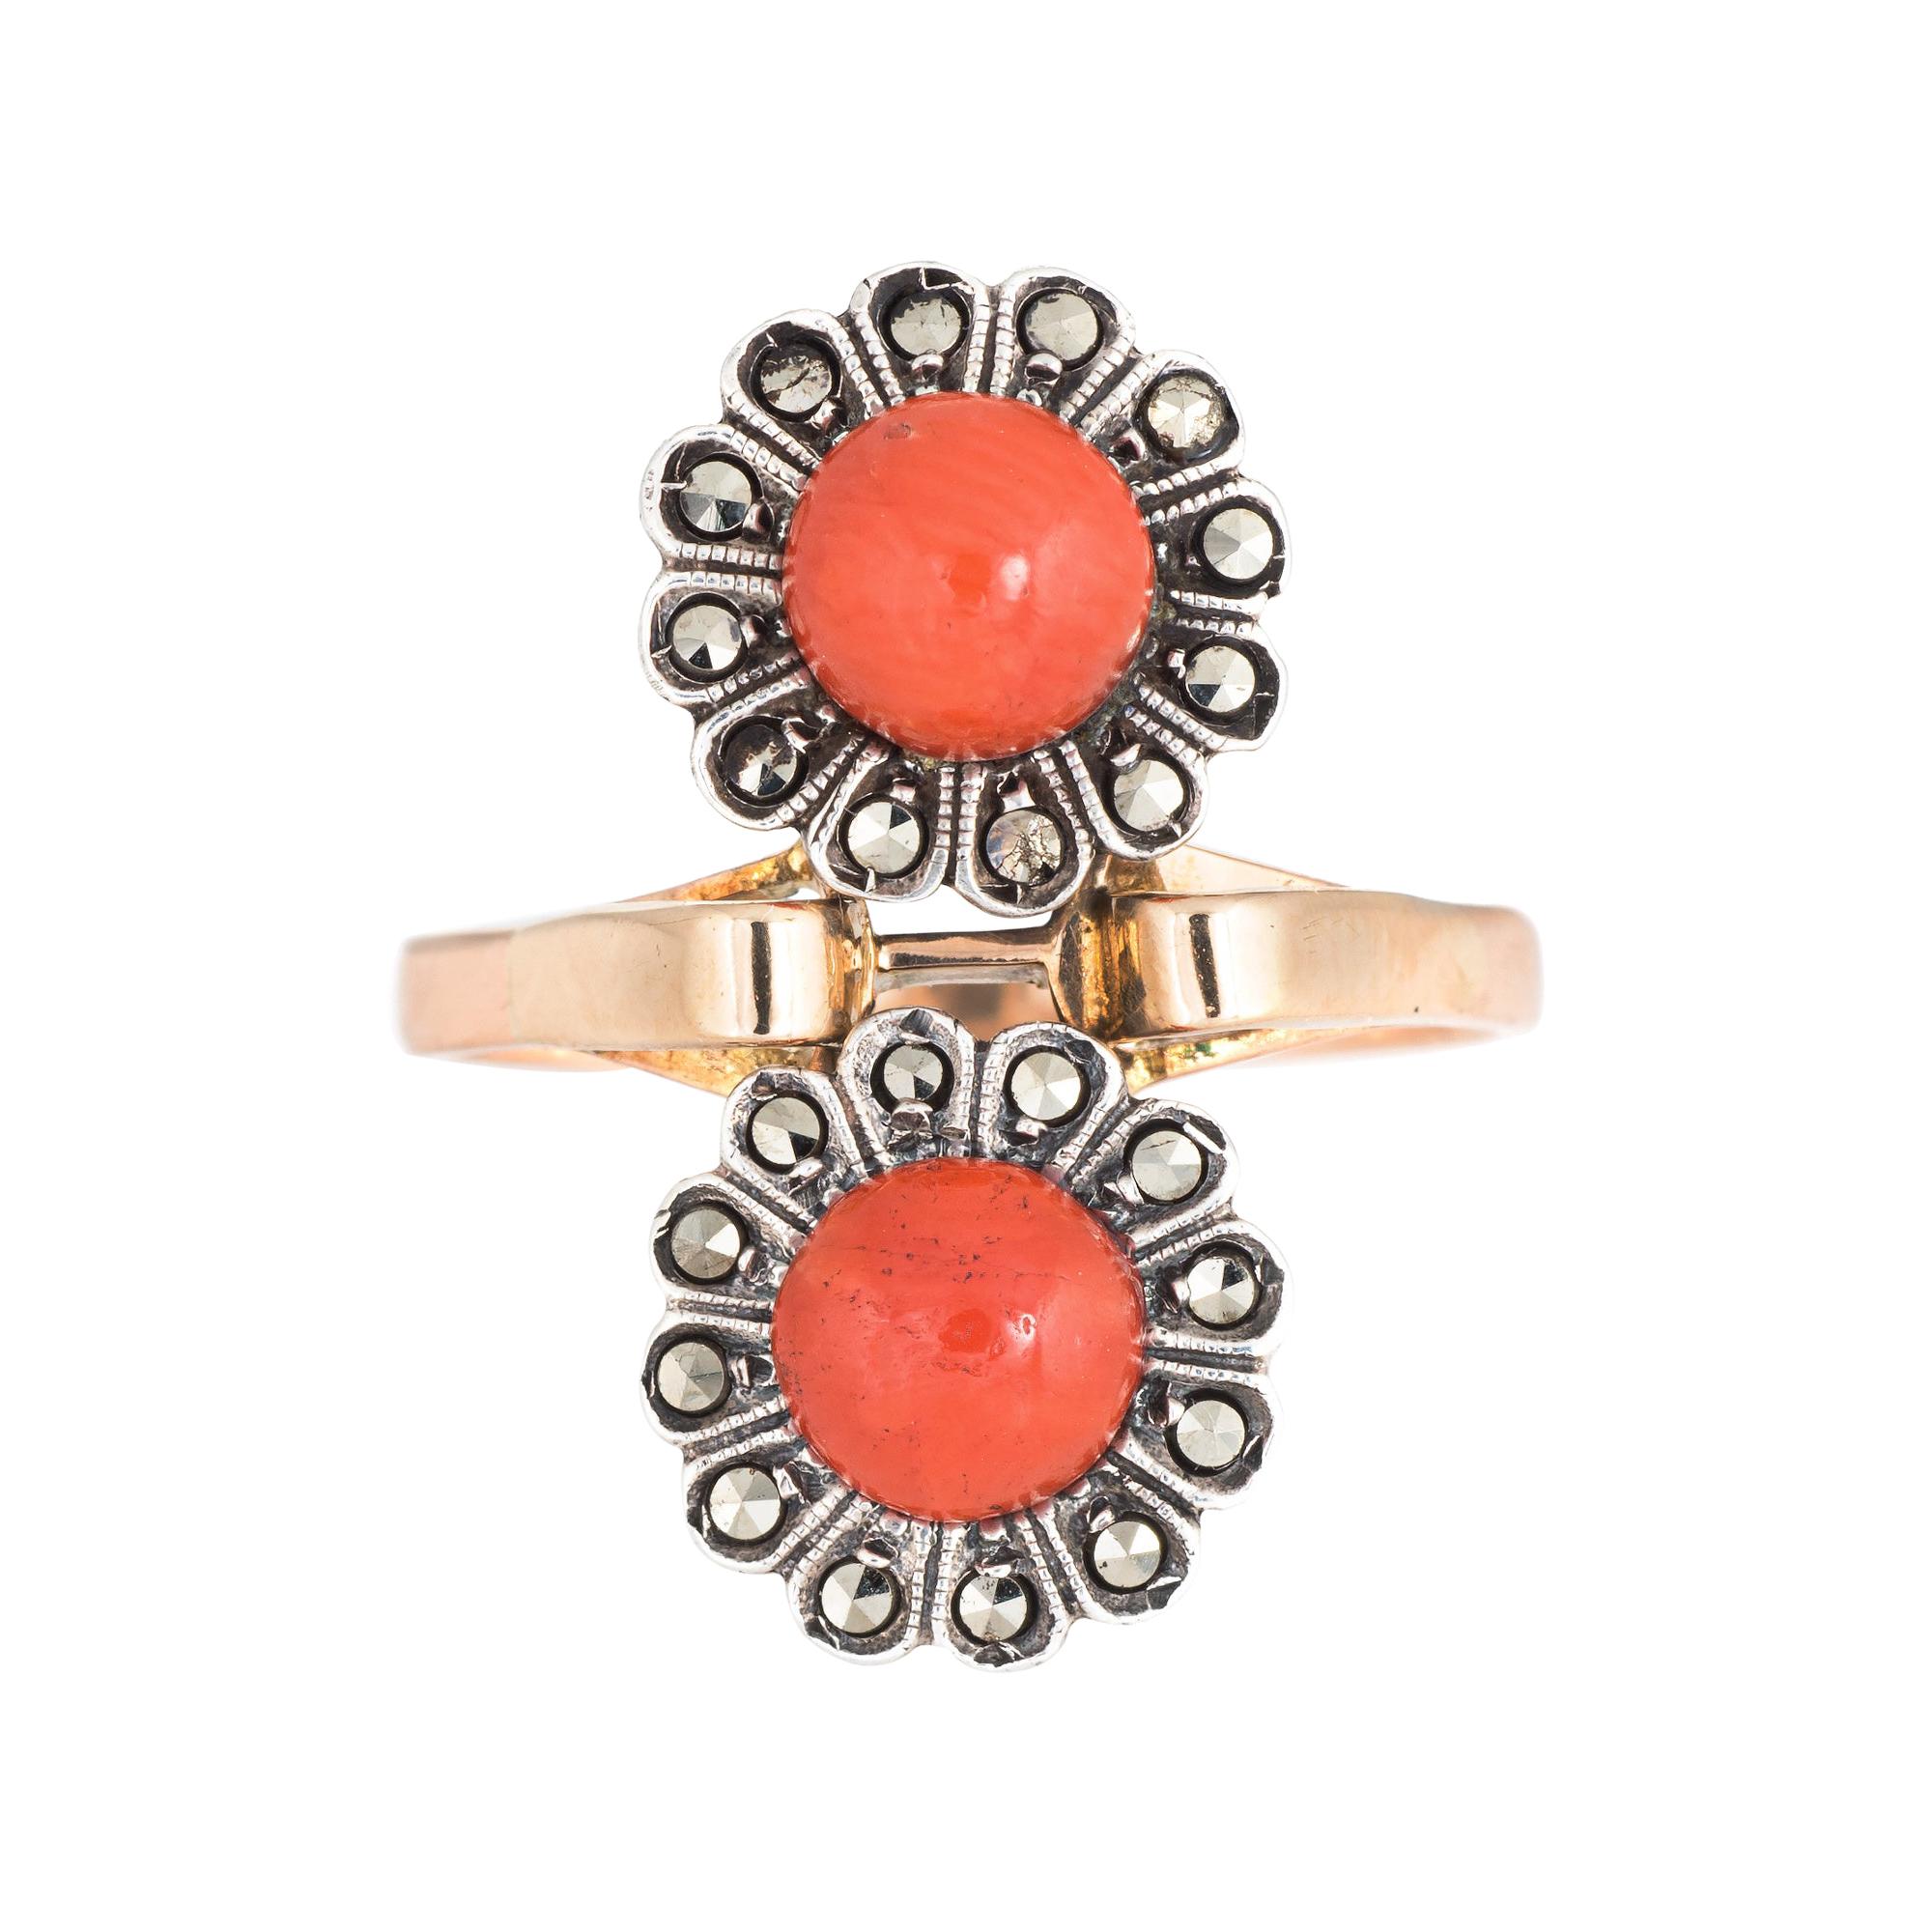 Vintage Moi Et Toi Coral Ring 18 Karat Gold Marcasite Double Flower Jewelry